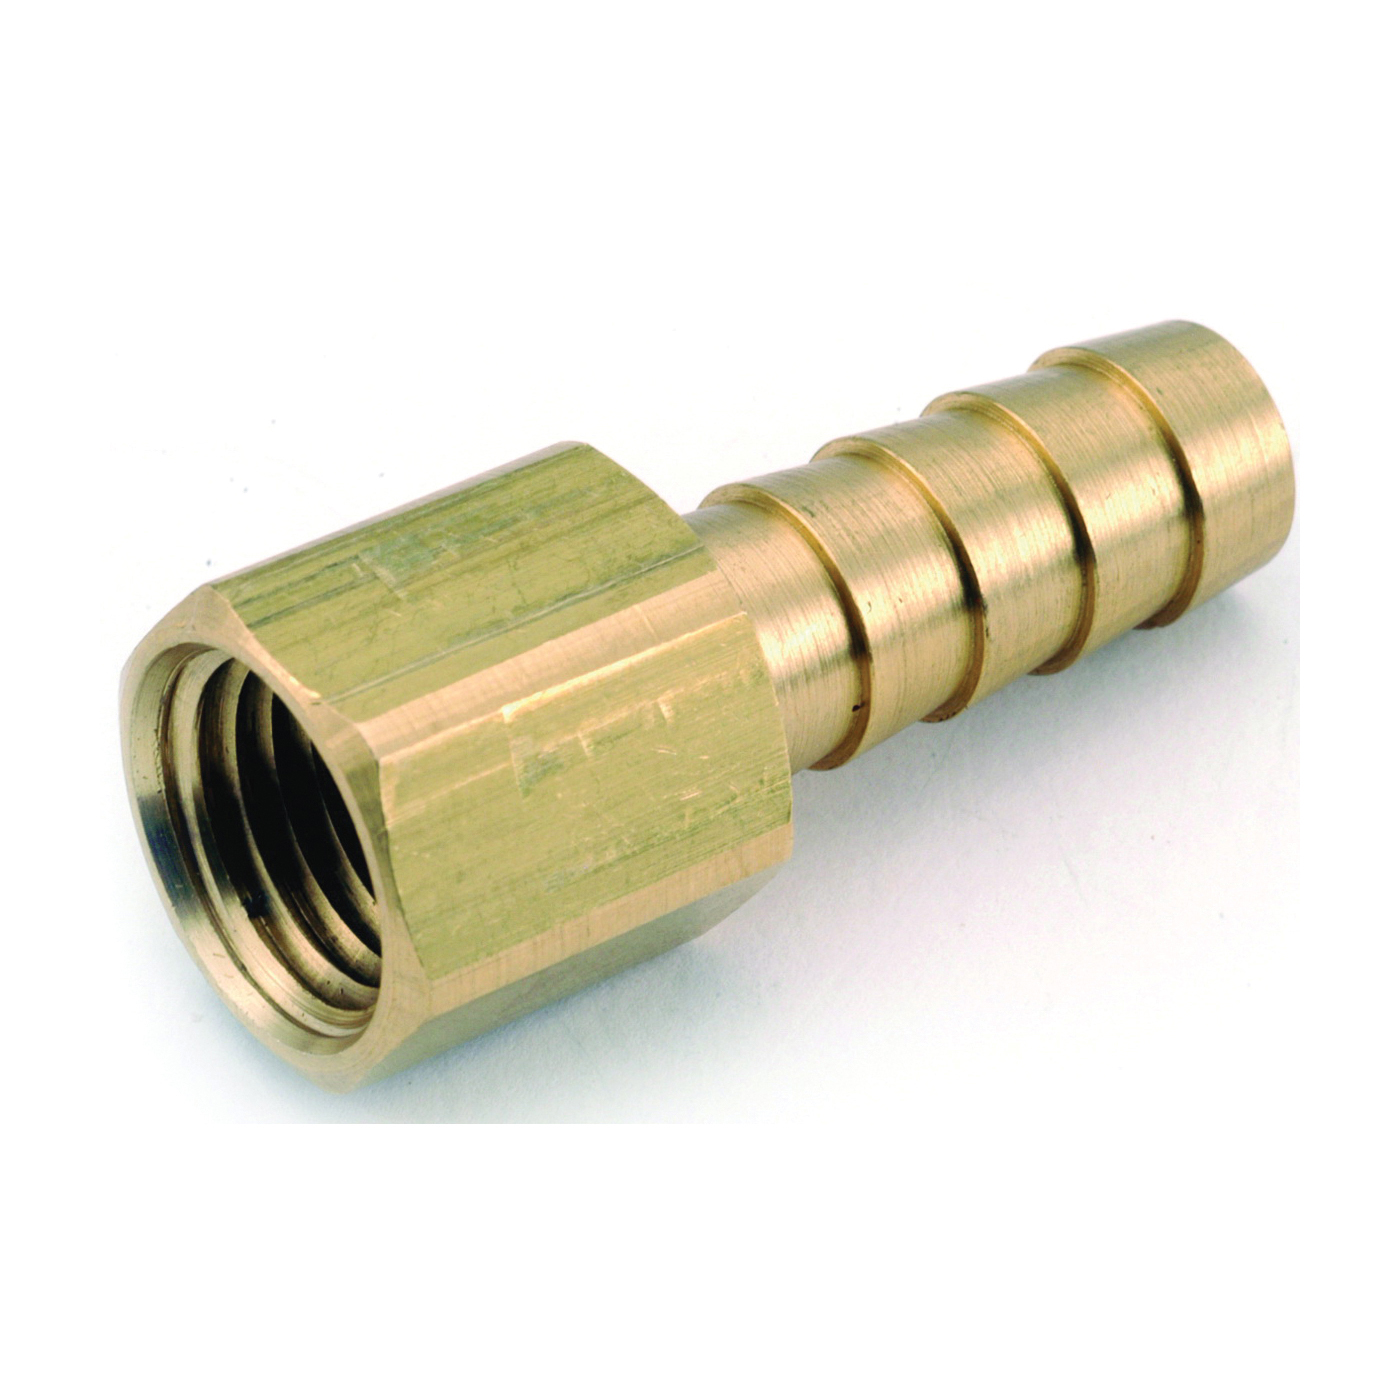 Anderson Metals 129F Series 757002-0606 Hose Adapter, 3/8 in, Barb, 3/8 in, FPT, Brass - 1